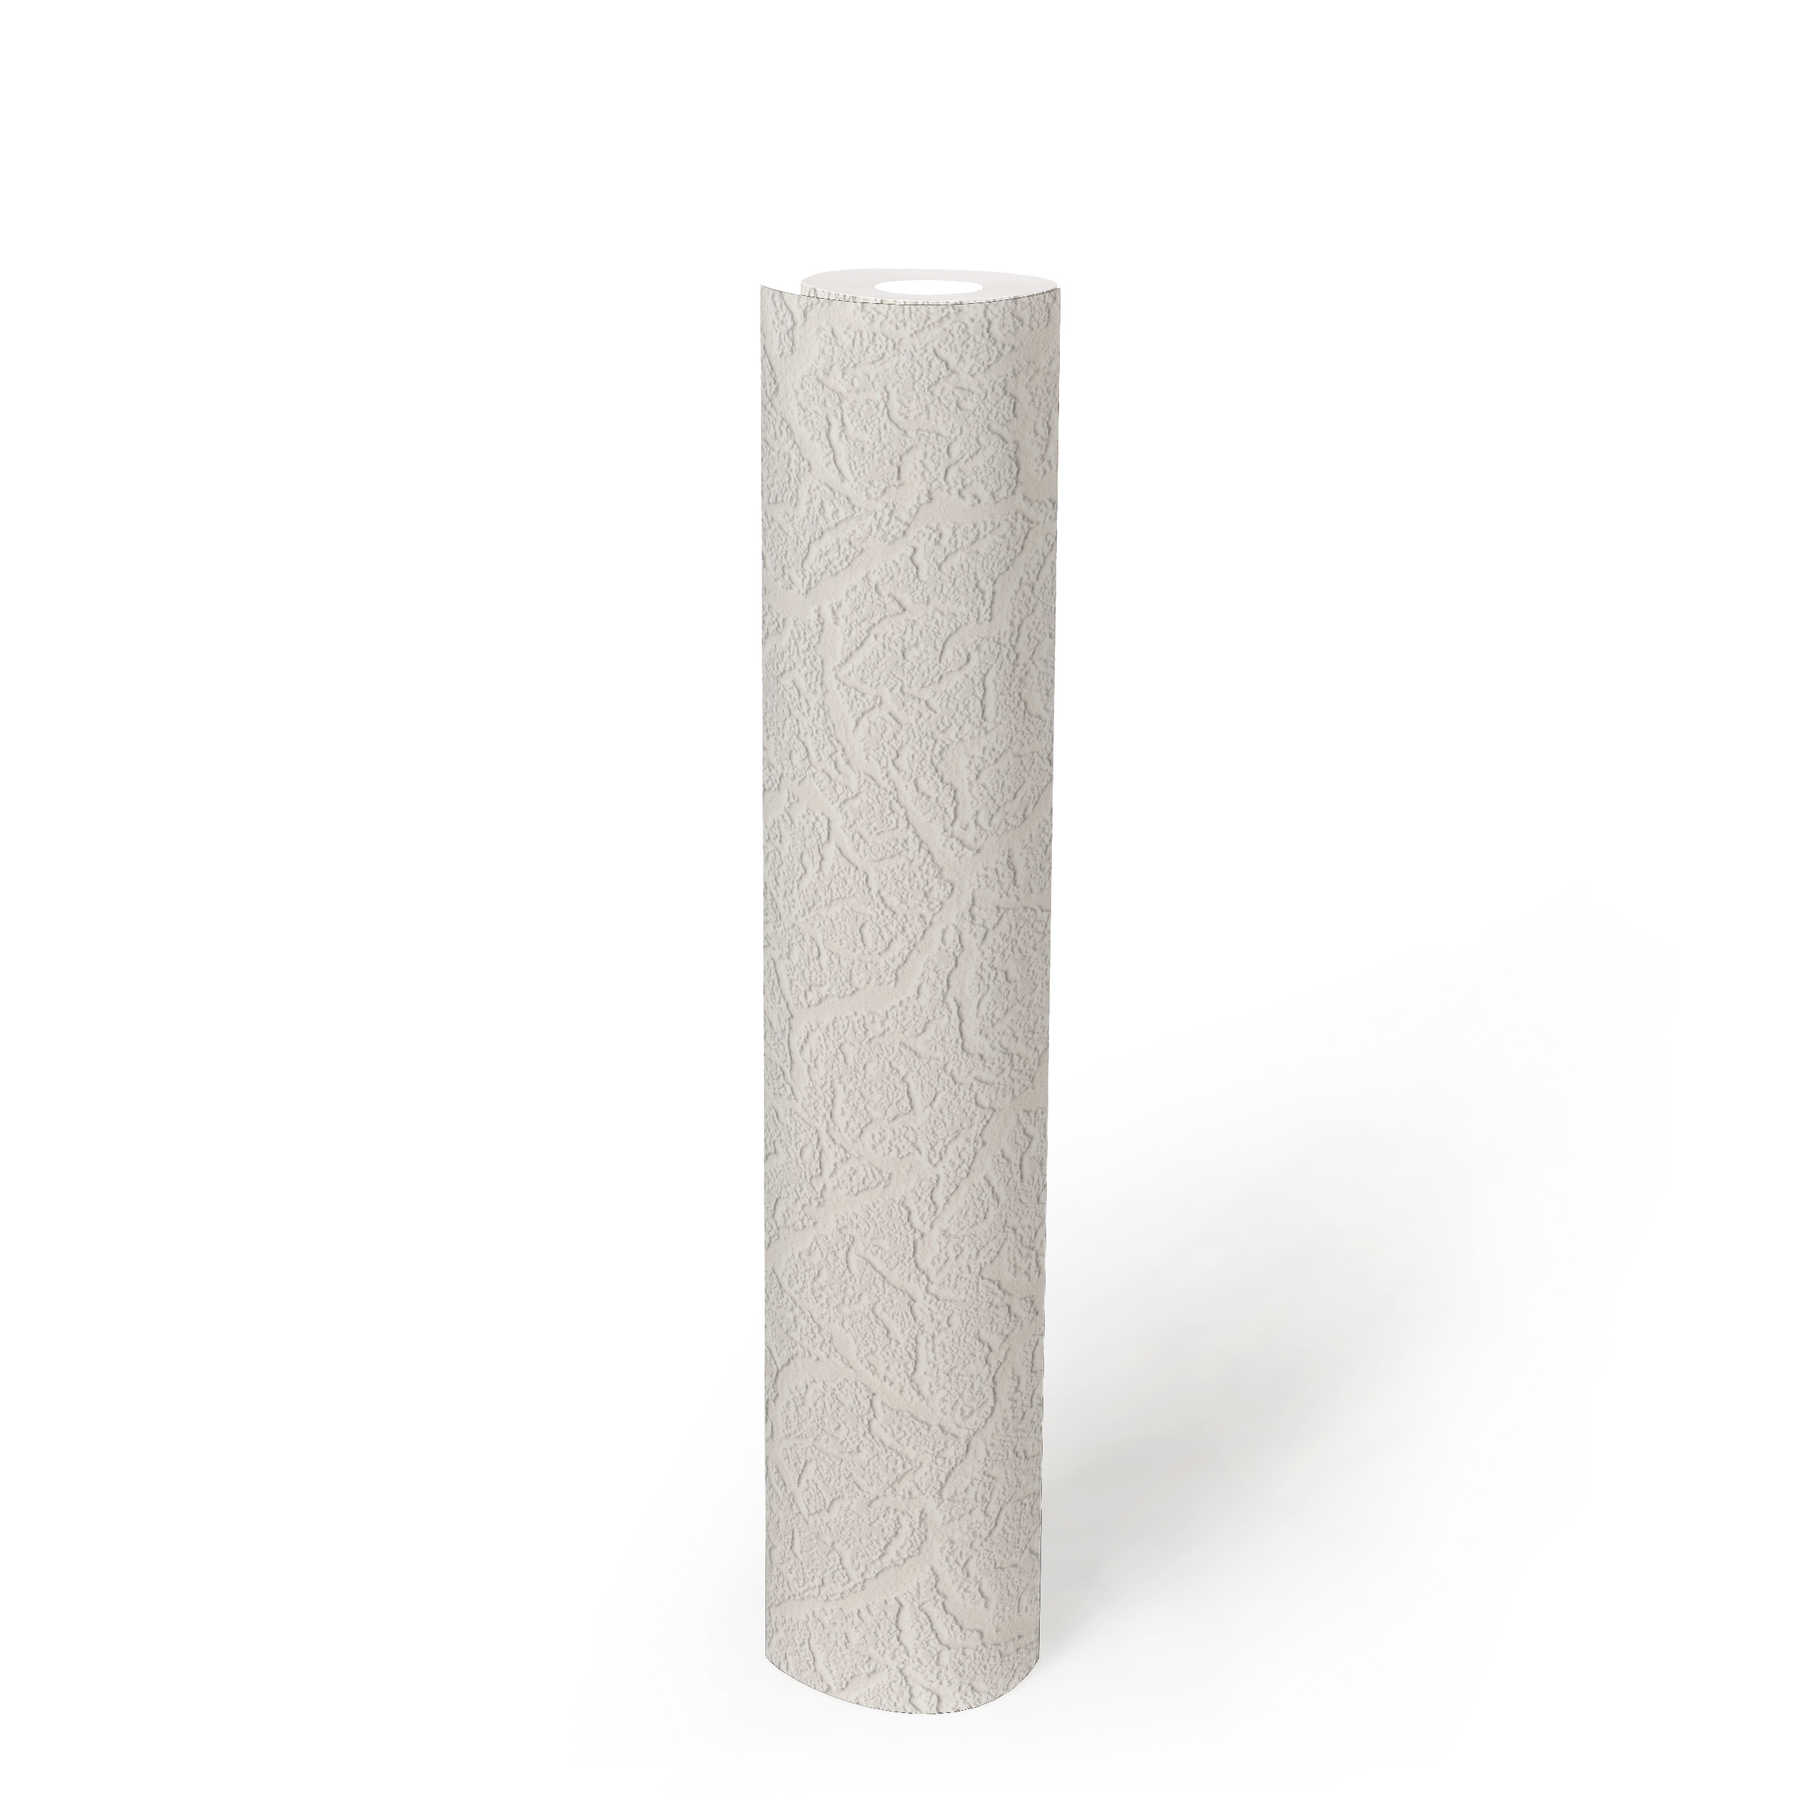             Paper wallpaper white with natural texture design
        